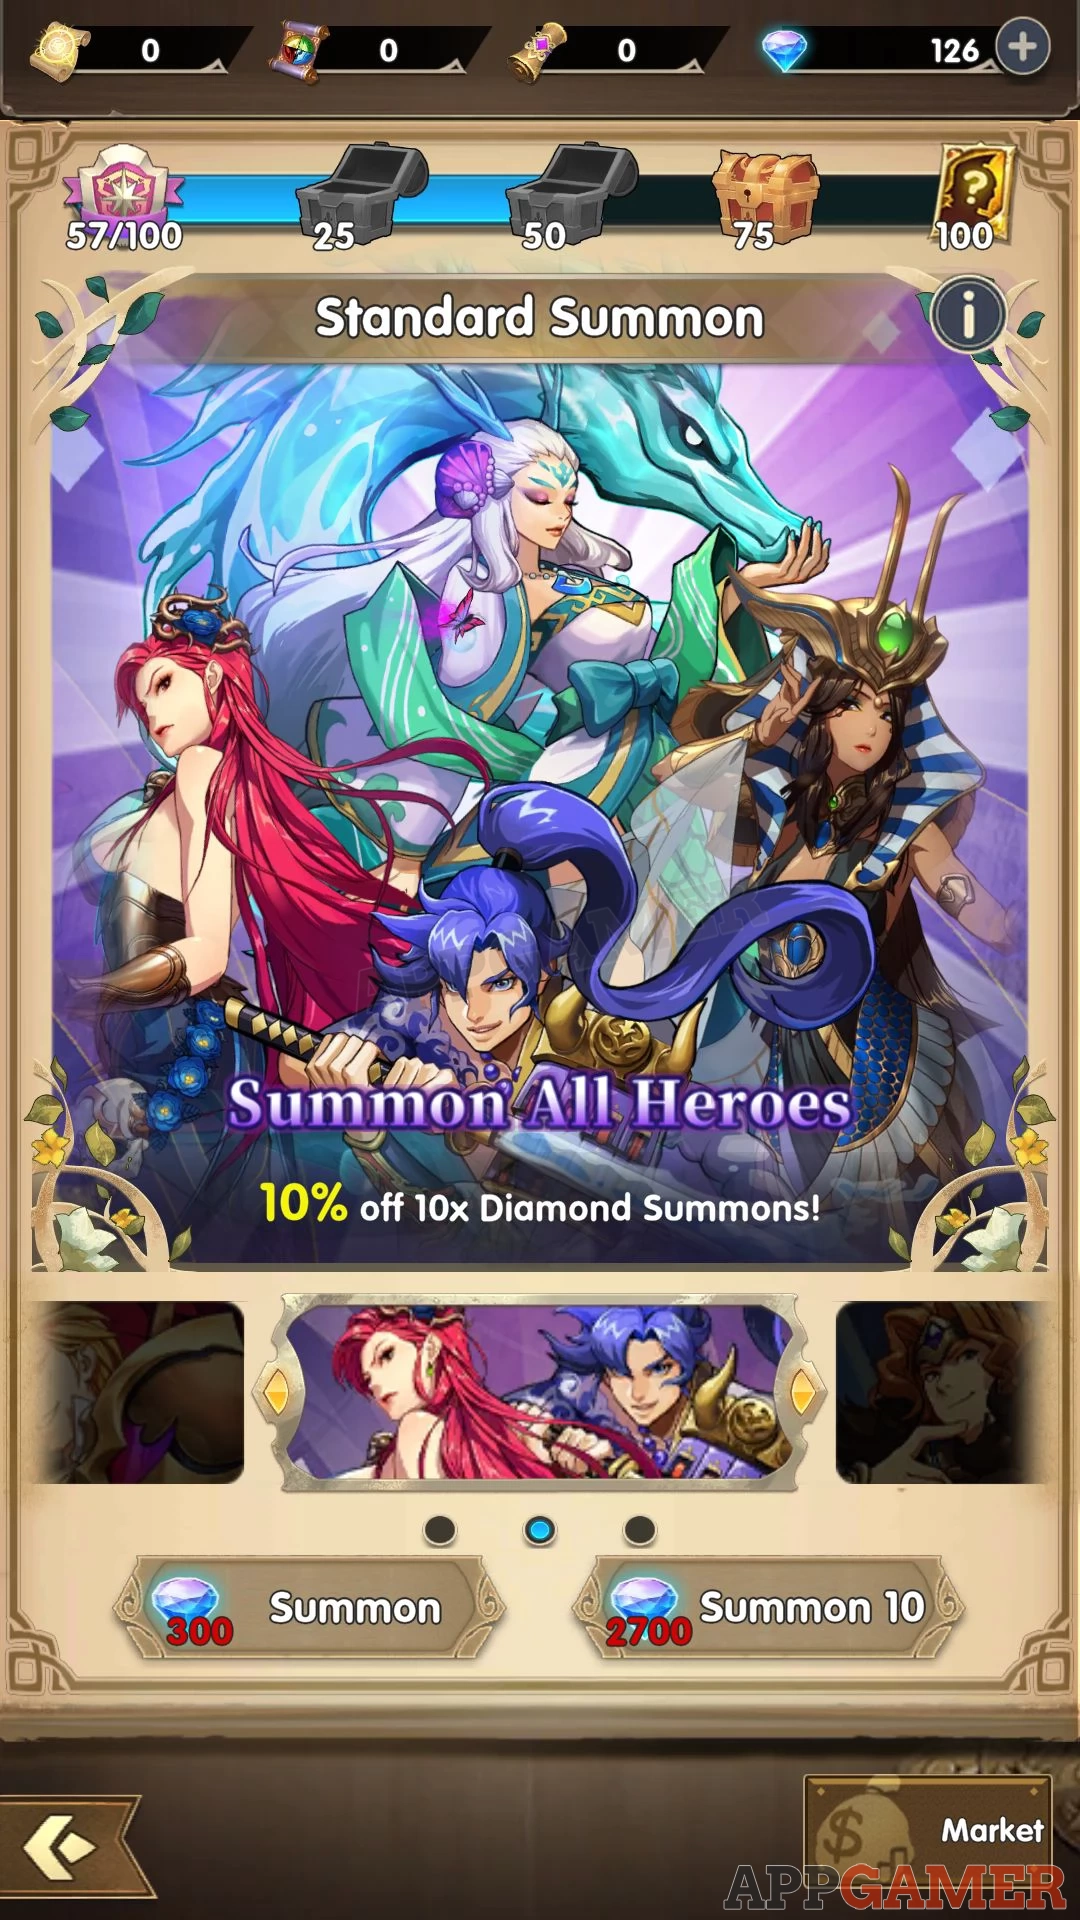 Mythic Summon Idle RPG Codes Wiki [NEW] (December 2023)